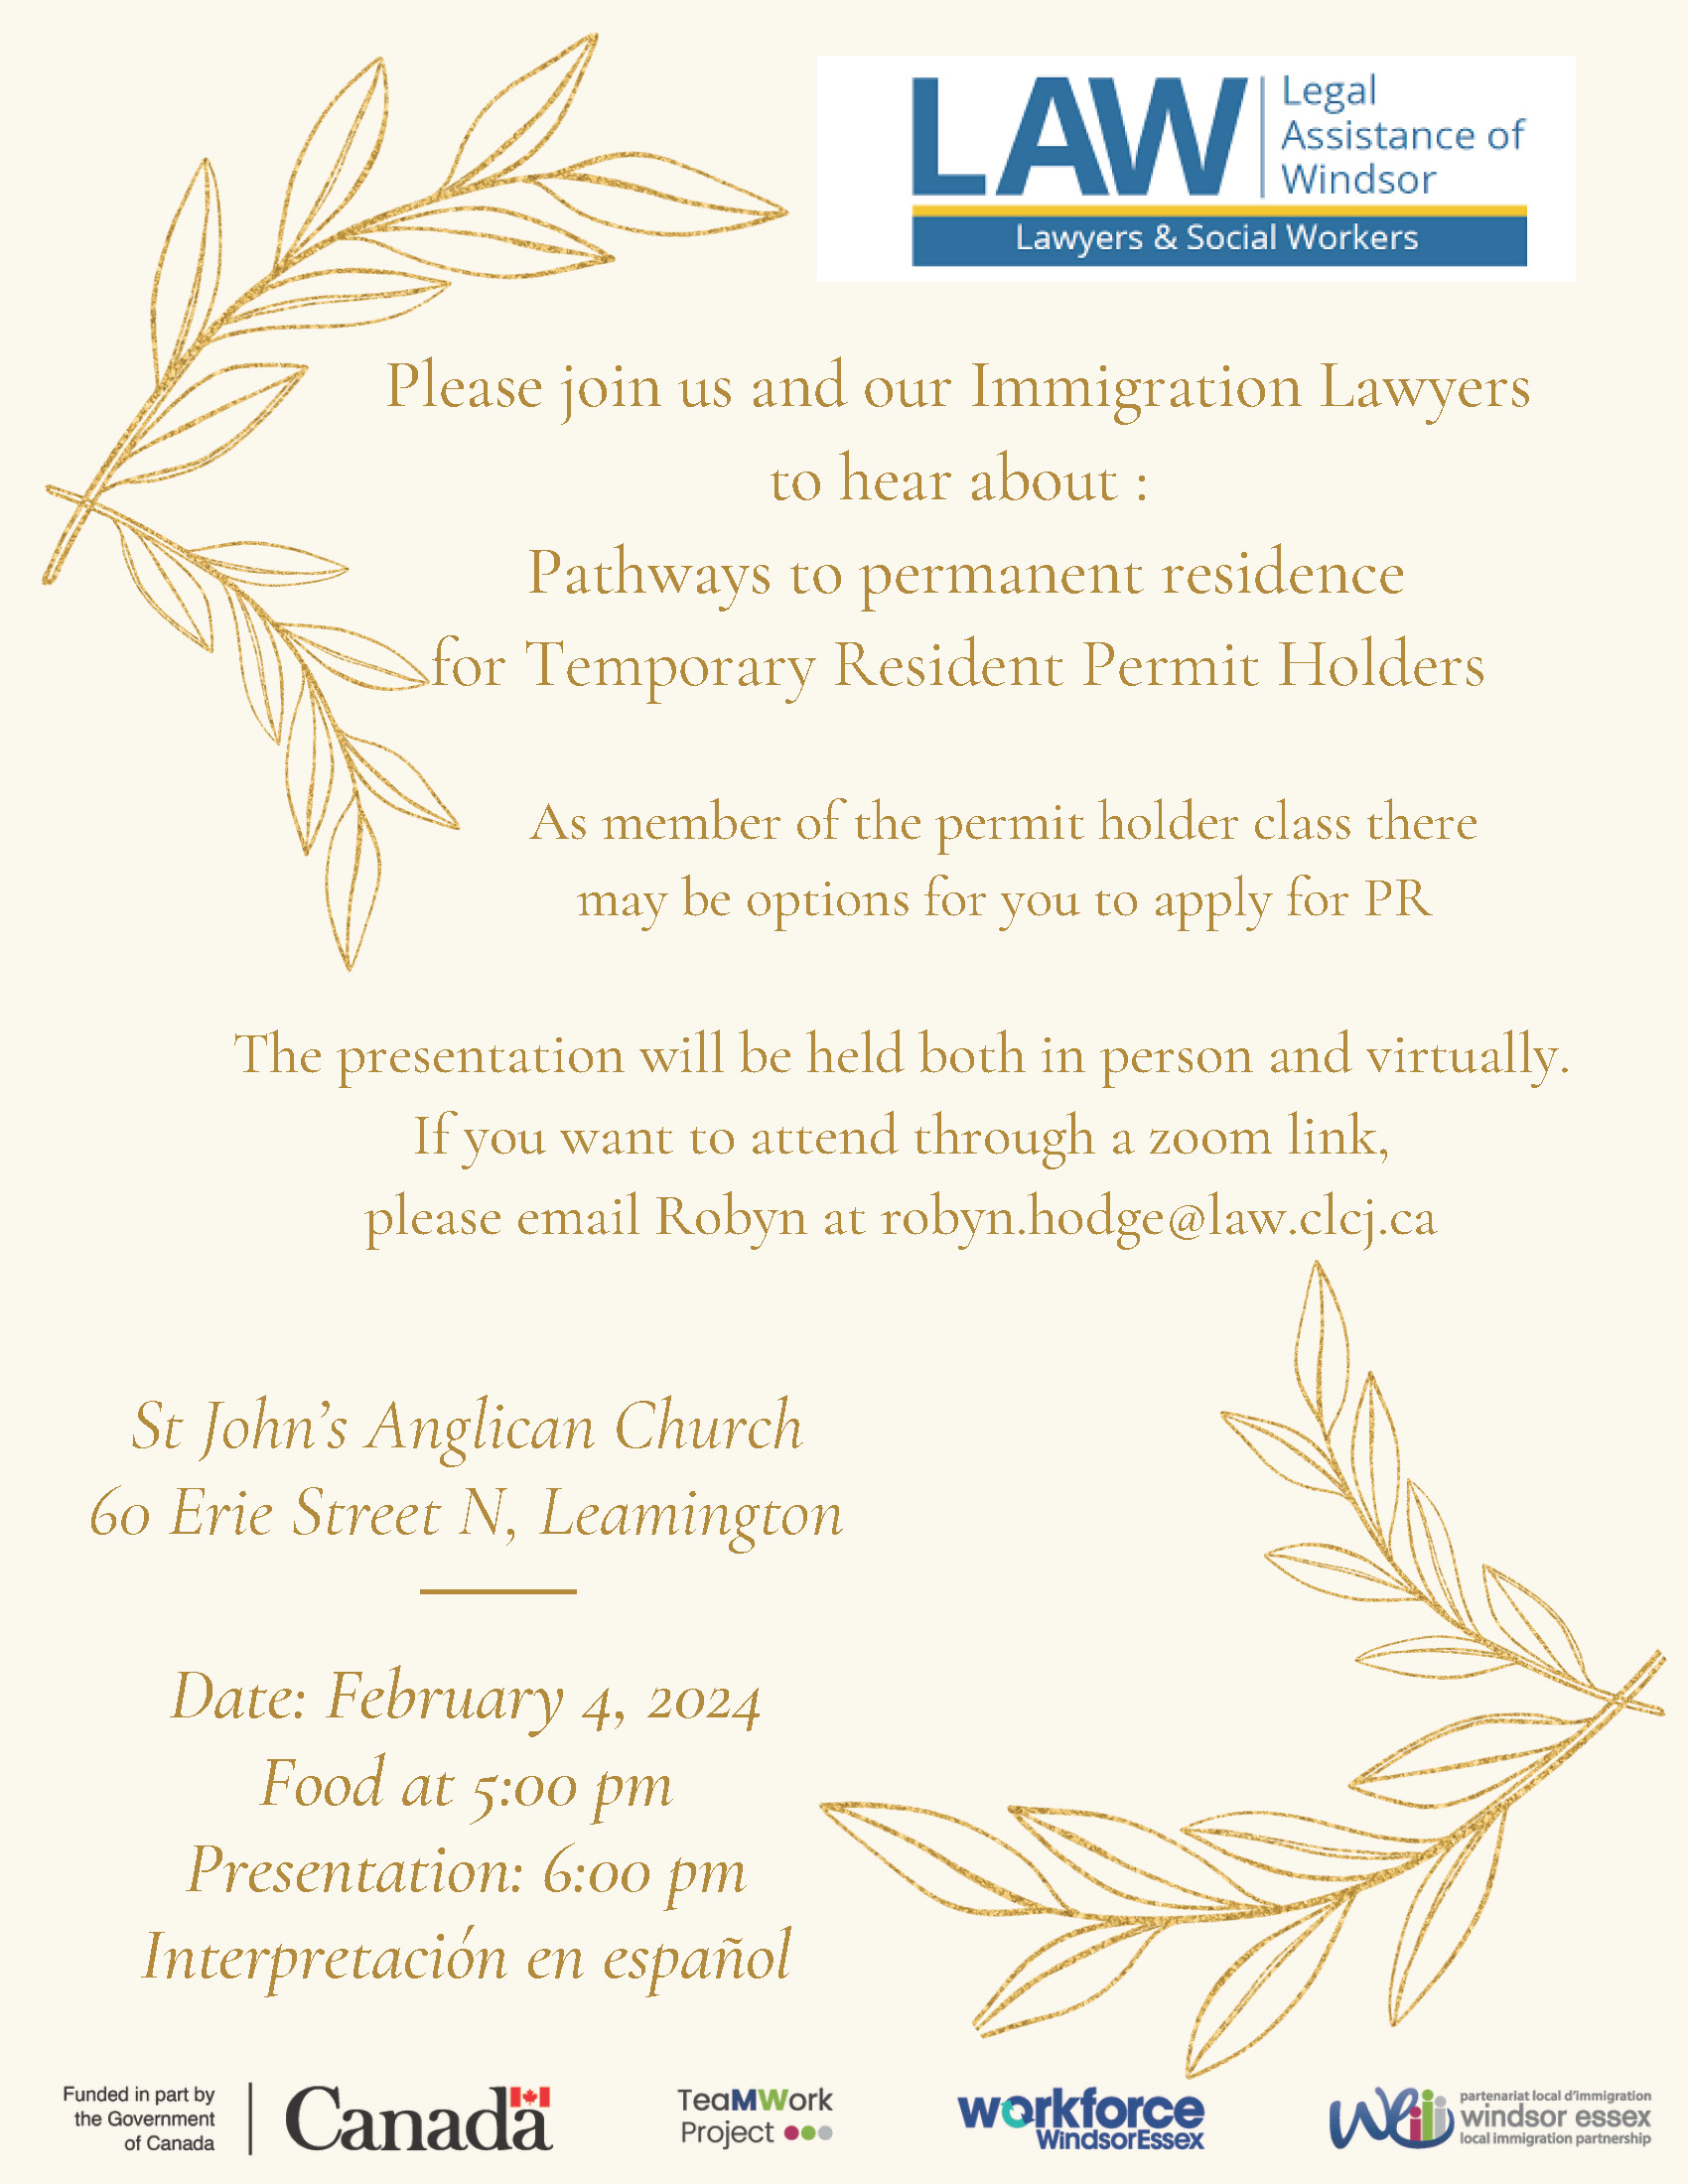 Please join us and our Immigration Lawyers to hear about: Pathways to Permanent Residence for Temporary Resident Permit Holders As member of the permit holder class there may be options for you to apply for PR! Interpretación en Español The presentation will be held both in person and virtually. If you want to attend through a zoom link, please email Robyn at robyn.hodge@law.clcj.ca. Location: St John’s Anglican Church, 60 Erie Street N, Leamington Date: February 4, 2024 Food at 5:00 pm Presentation: 6:00 pm